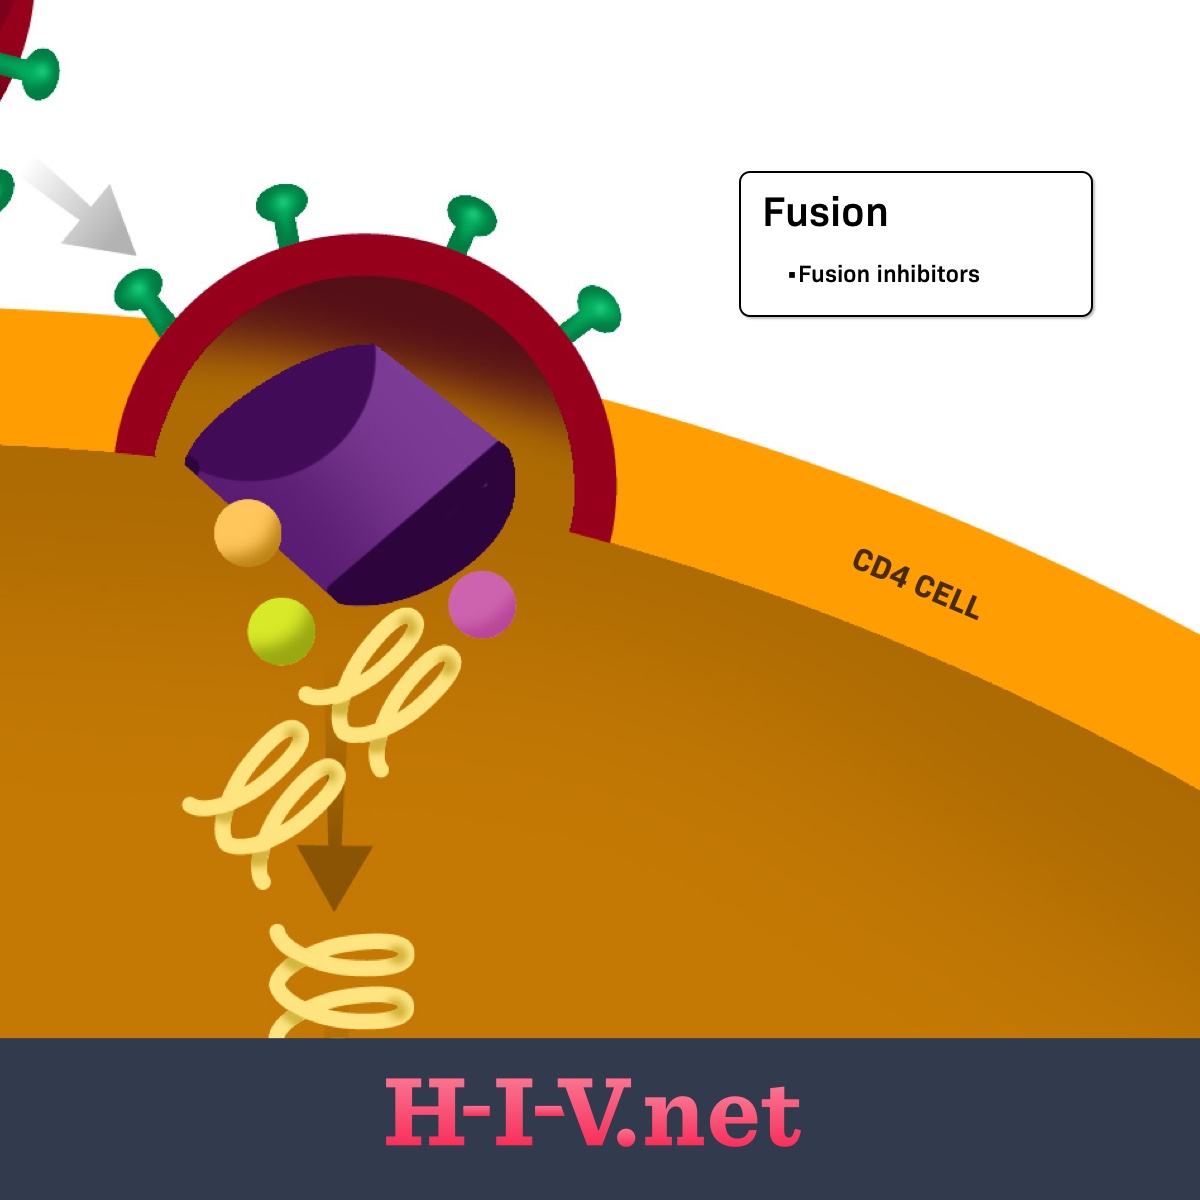 Fusion inhibitors target fusion in the HIV life cycle